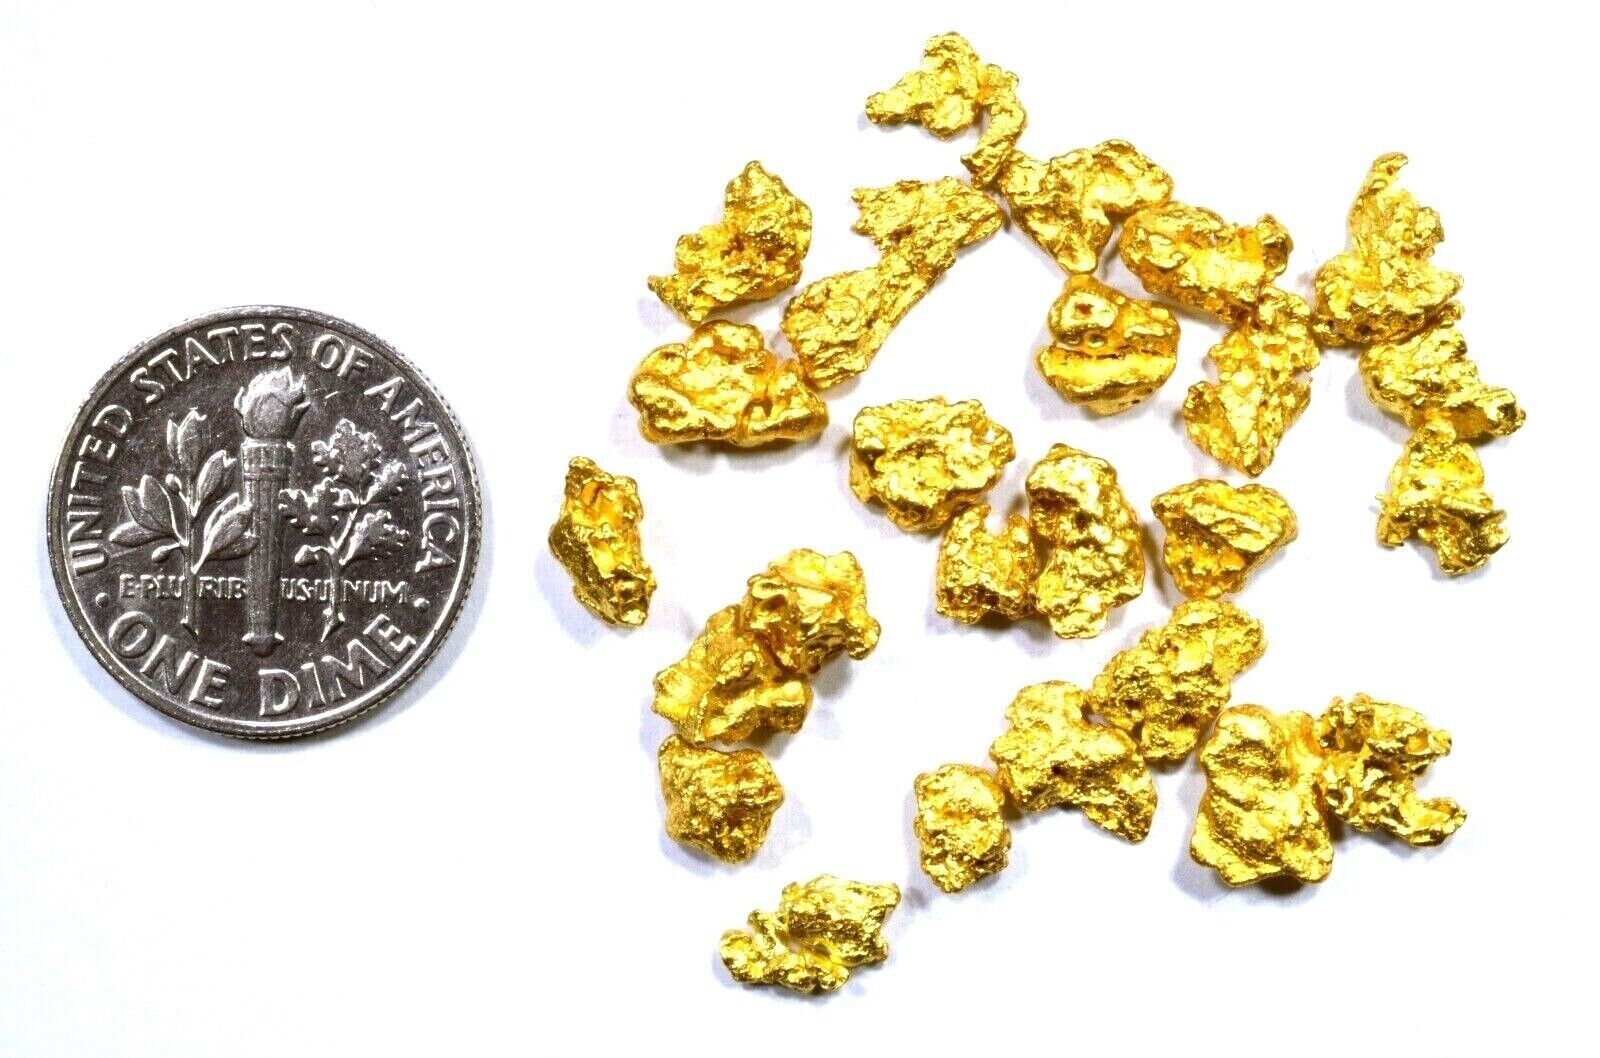 1/2 TROY OZ AUSTRALIAN NATURAL PURE GOLD NUGGETS #6 MESH WITH BOTTLE (#AUB600)